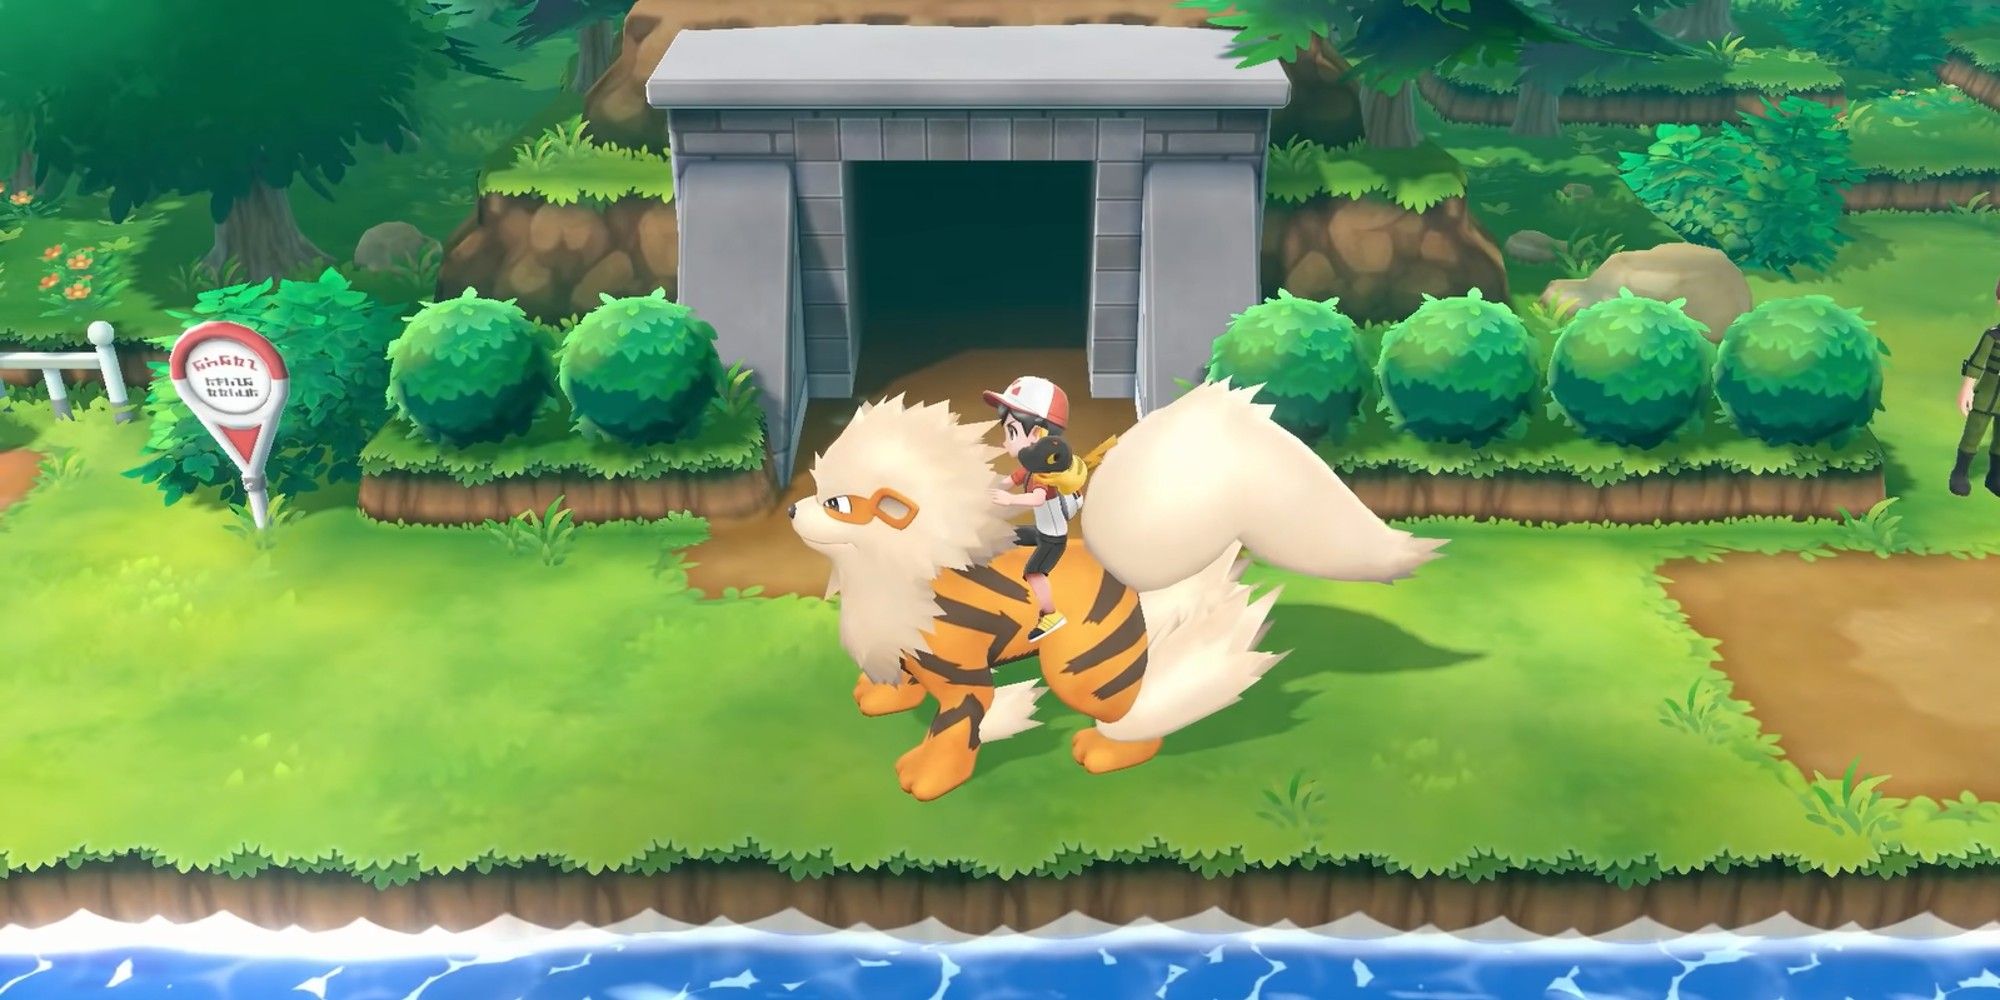 Arcanine from Pokemon Let's Go Eevee & Let's Go Pikachu, standing still in front of Diglett's Cave Entrance